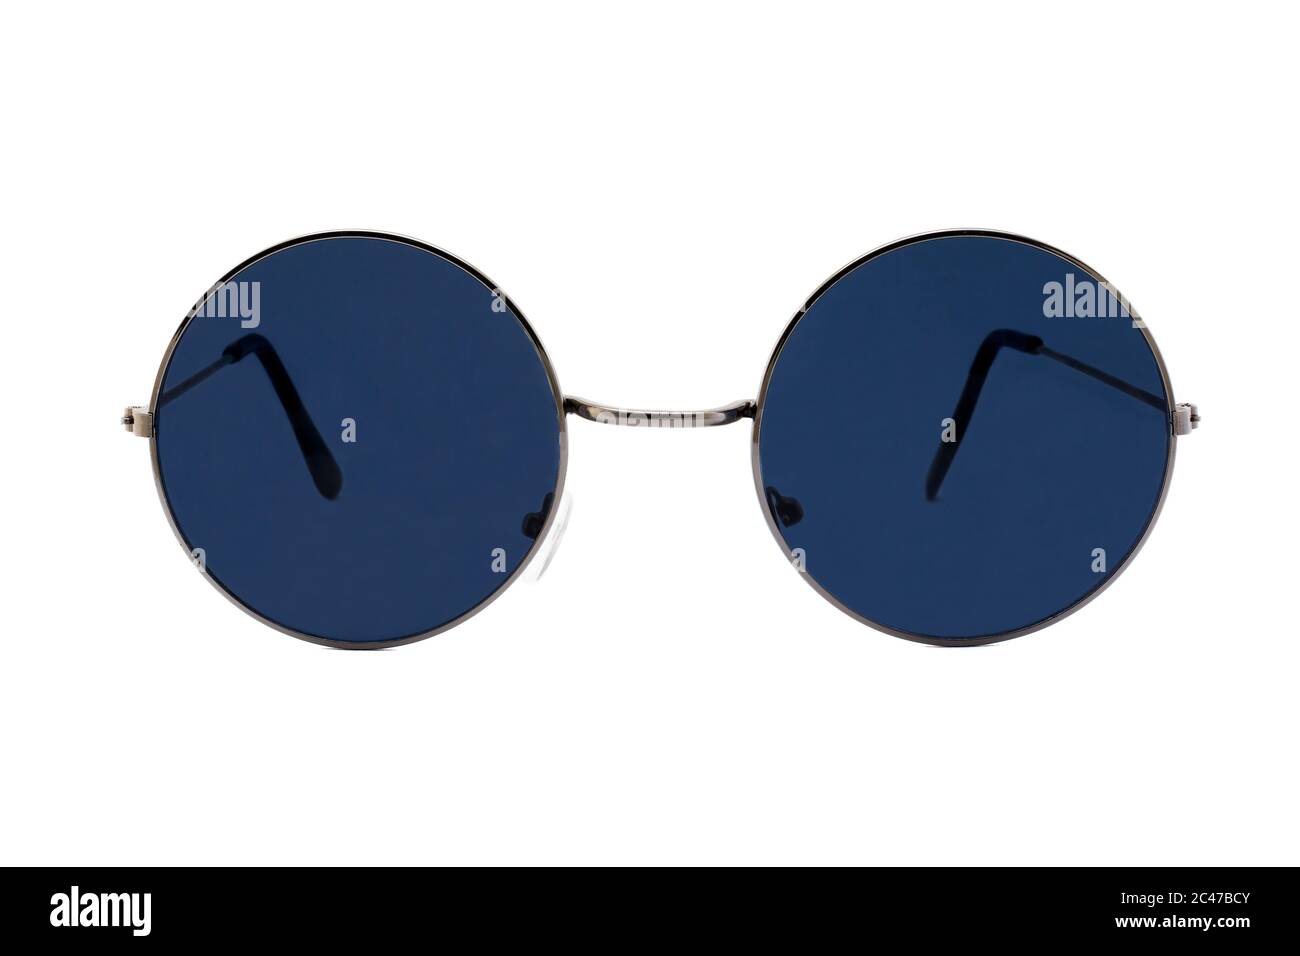 Street style oval sunglasses with thin black metal frame, clear dark blue lens, isolated on white background, front view. Stock Photo